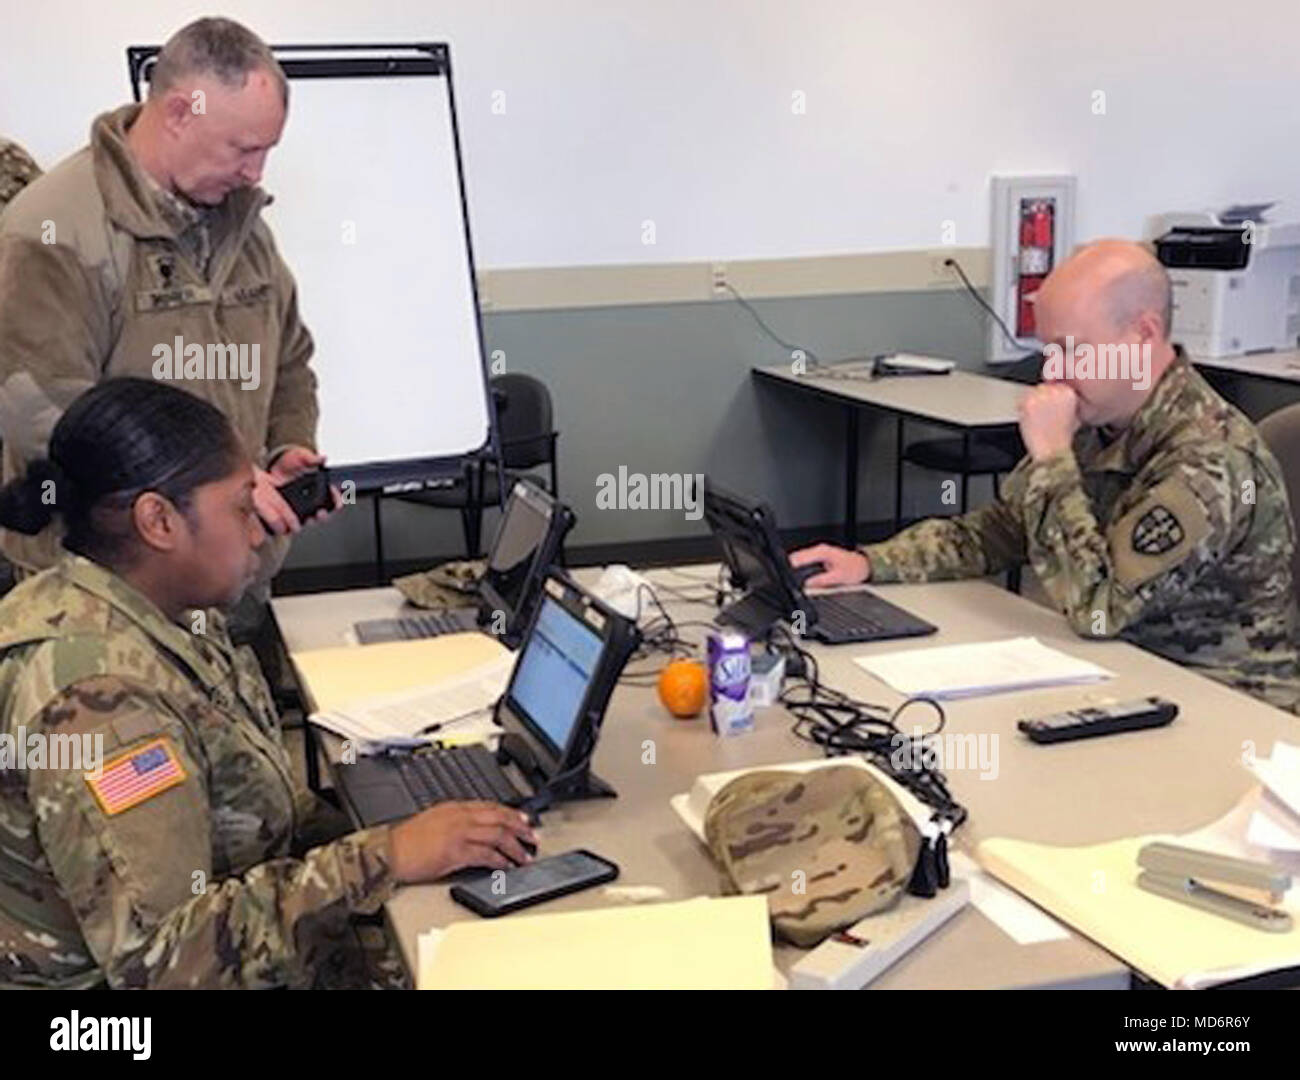 Col. Steven Sanson and Capt. Angel Jones upload observations into the Joint Lessons Learned Information System at Regional Medic 2018.  Army Reserve Medical Command’s Medical Readiness and Training Command delivers relevant and realistic collective training for Joint, Multi-National, and Reserve Component Forces through the Army Reserve’s Combat Support Training Program.  Approximately 150 personnel assigned to MRTC and Western Medical Area Readiness Support Group served as Observer Coach / Trainers (OC/Ts) and support staff to run Regional Medic for a training audience of approximately 2,100  Stock Photo